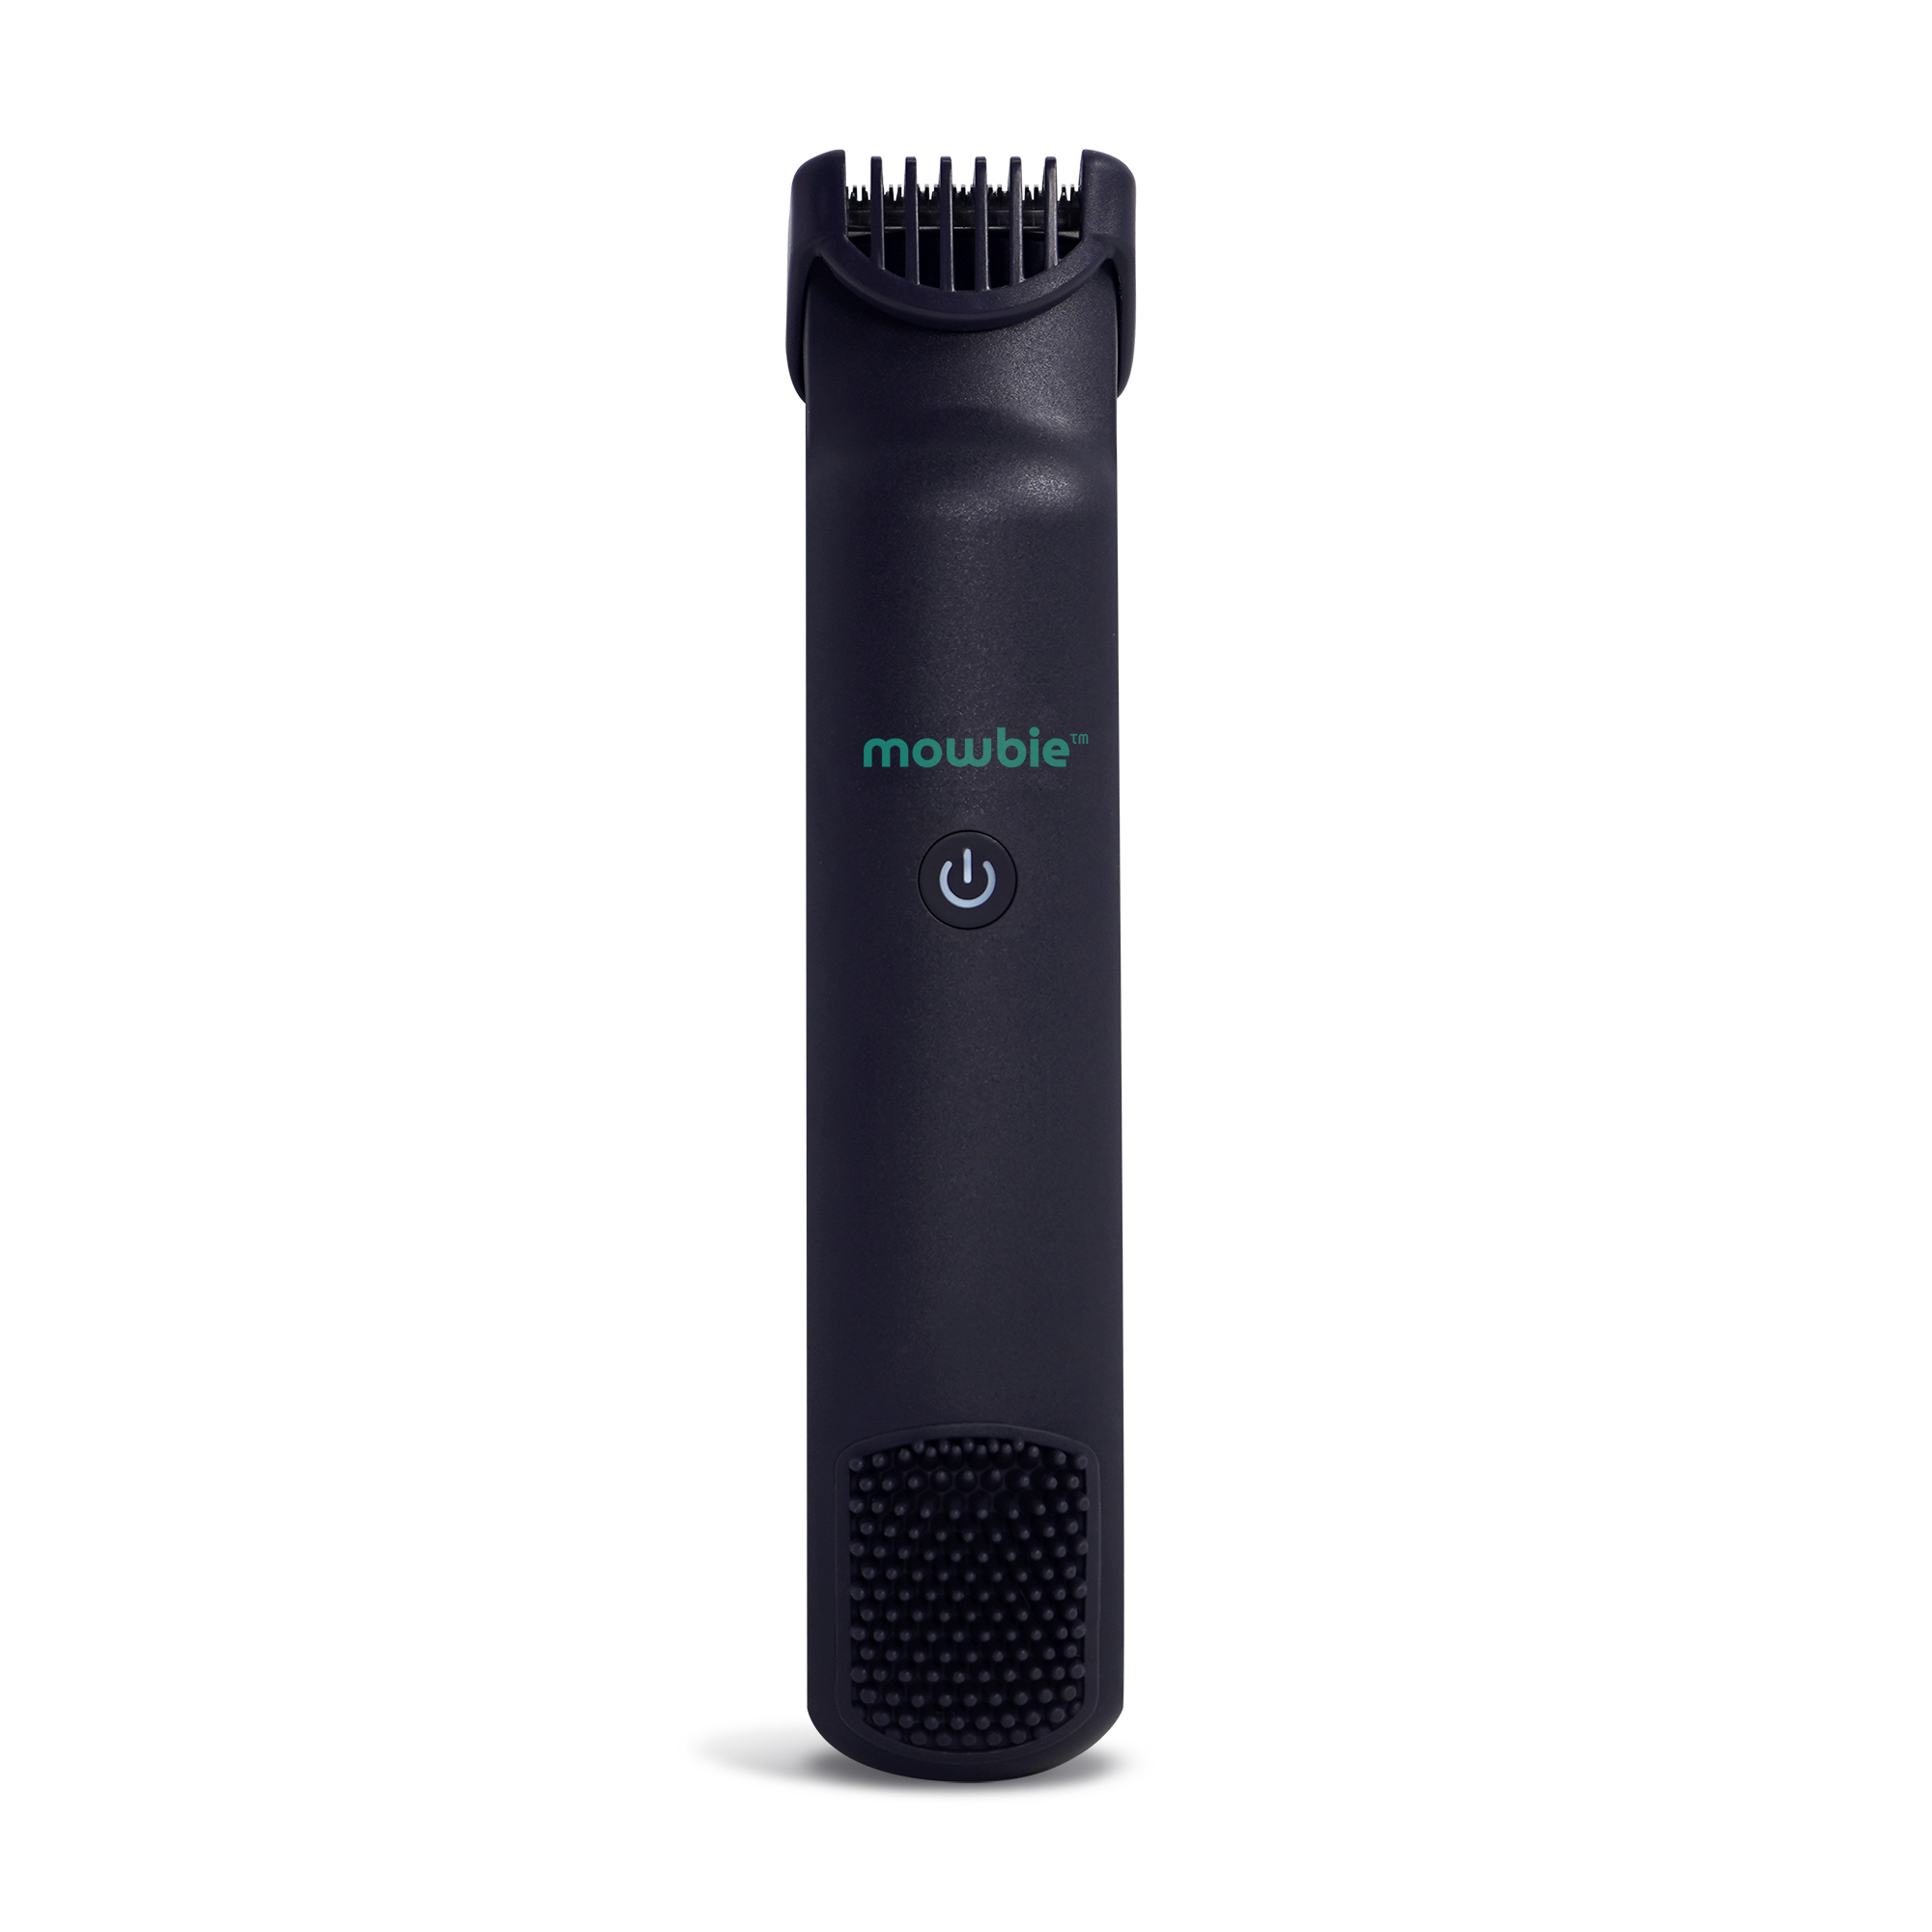 mowbie Beard Trimmer, Male Hair Trimmer & Clipper, Waterproof, Green LED - image 3 of 12